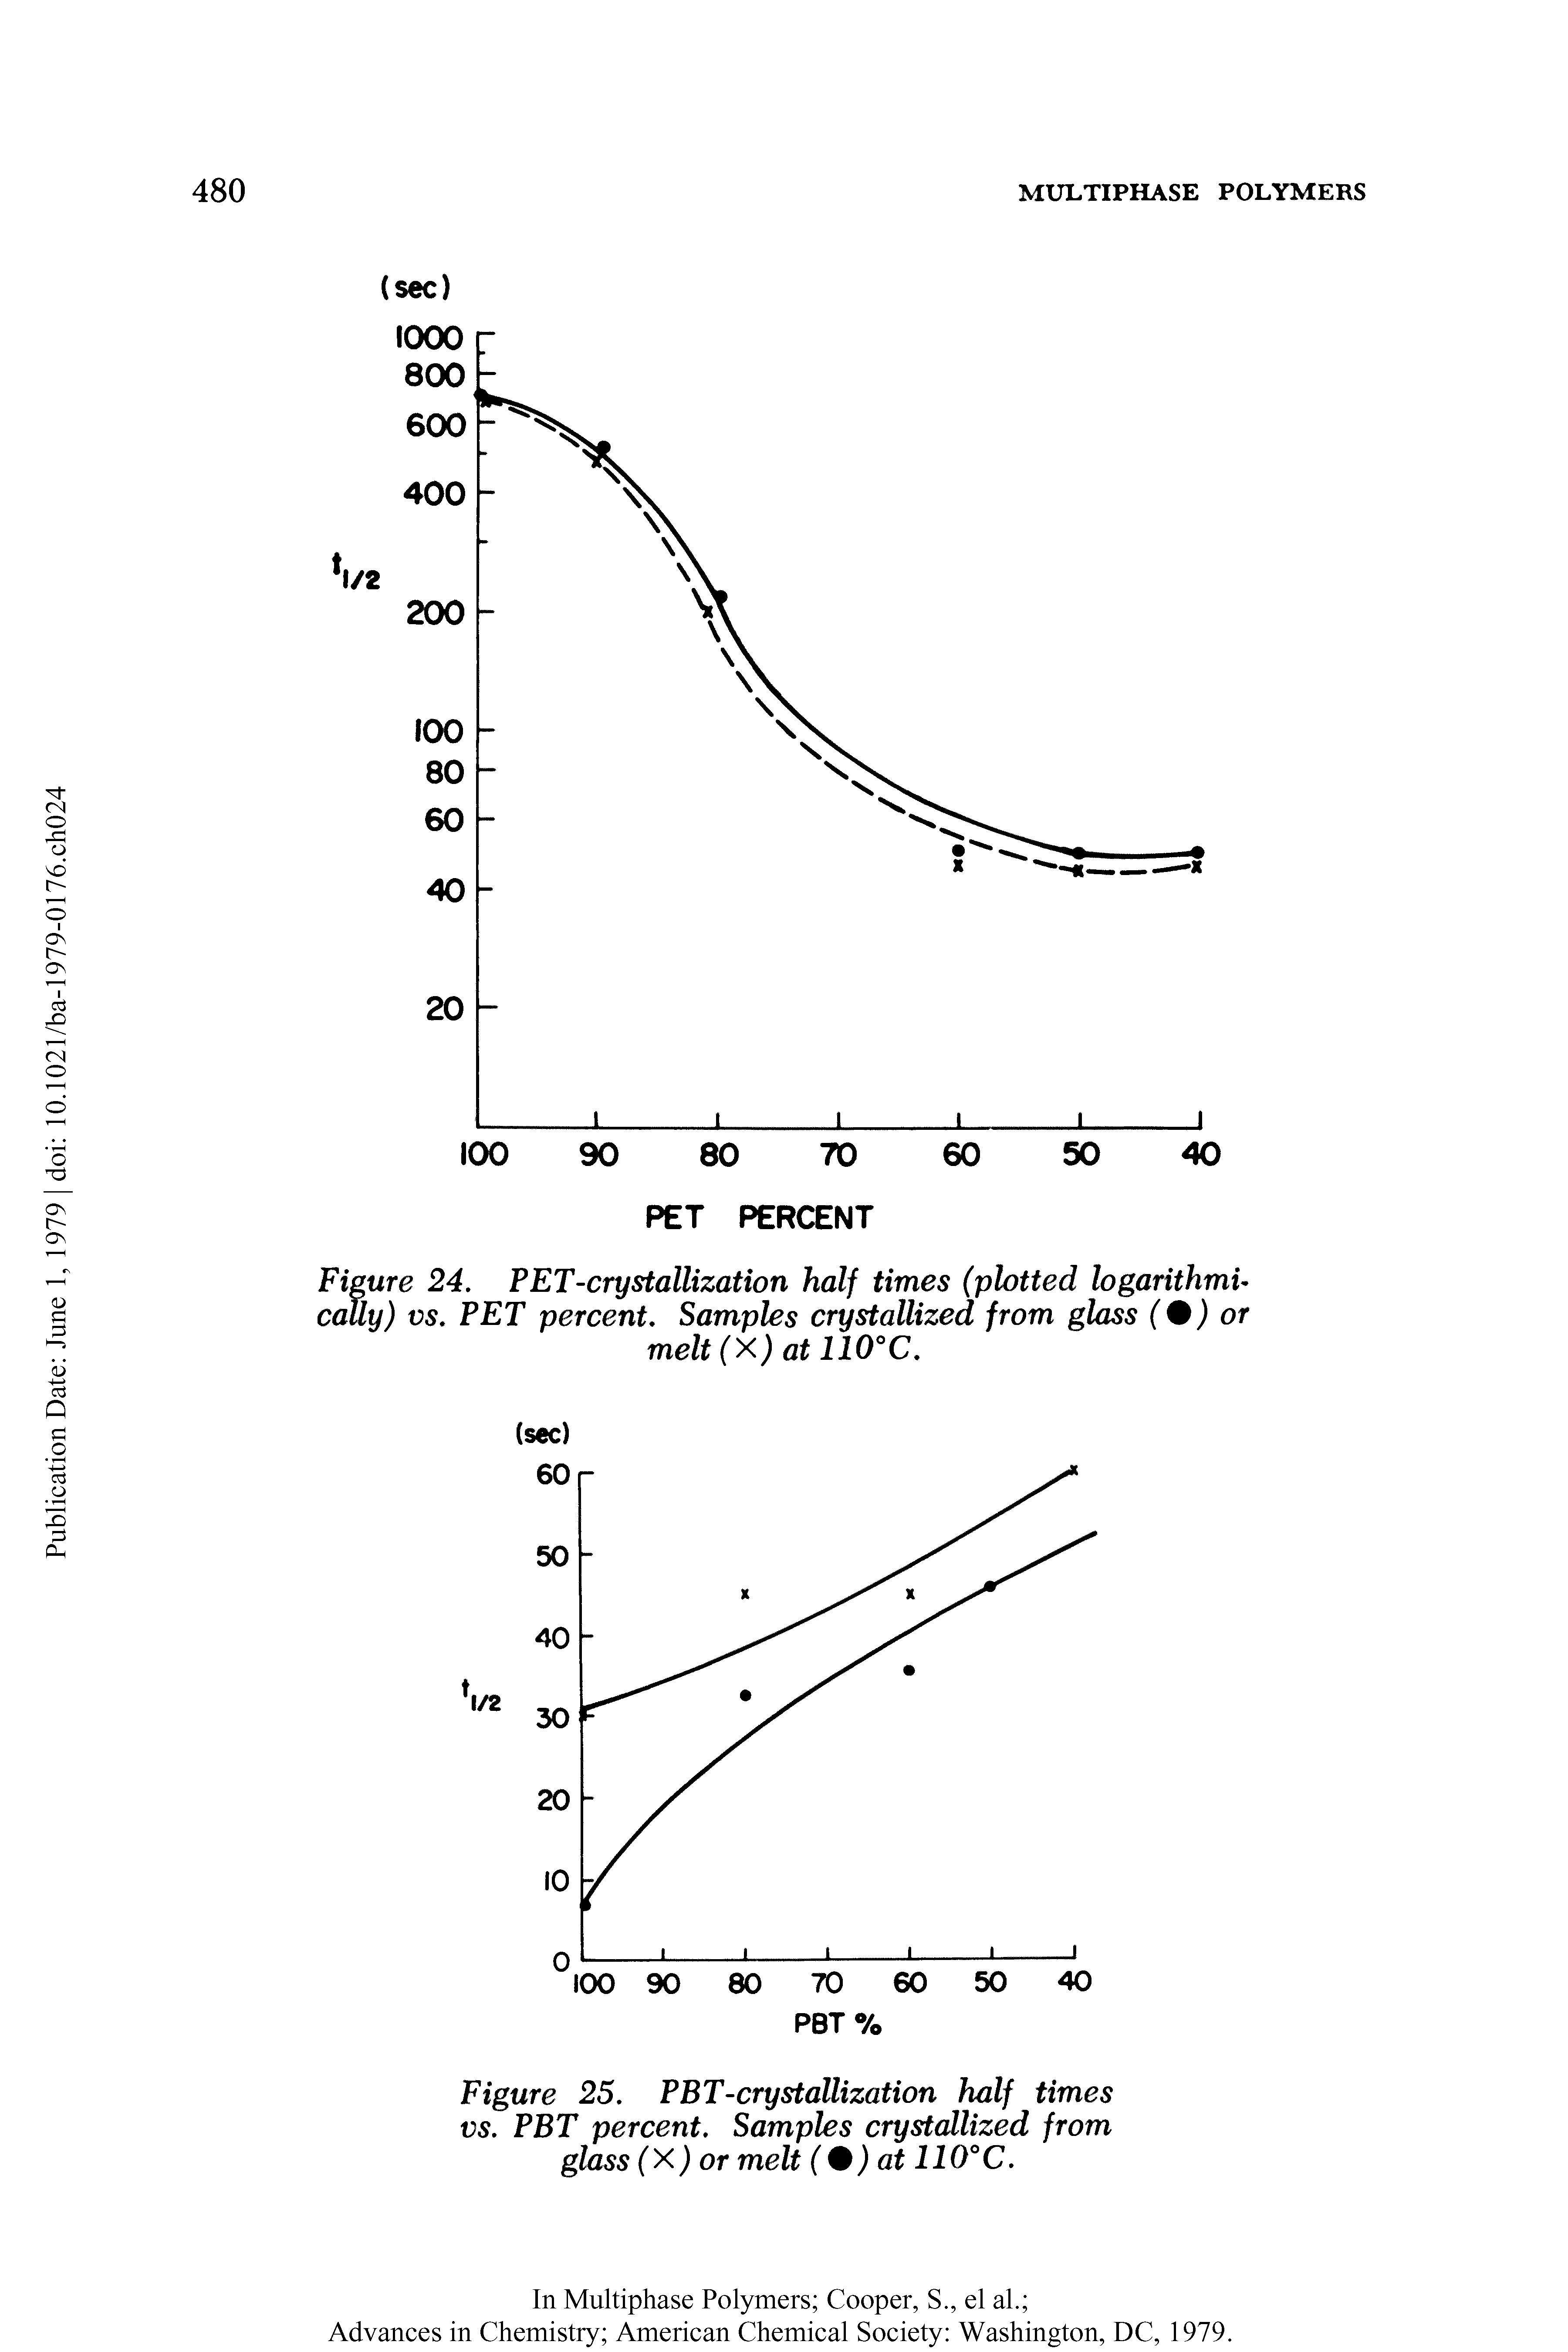 Figure 25. PBT-crystallization half times vs. PBT percent. Samples crystallized from glass (X) or melt (0) at 110°C.